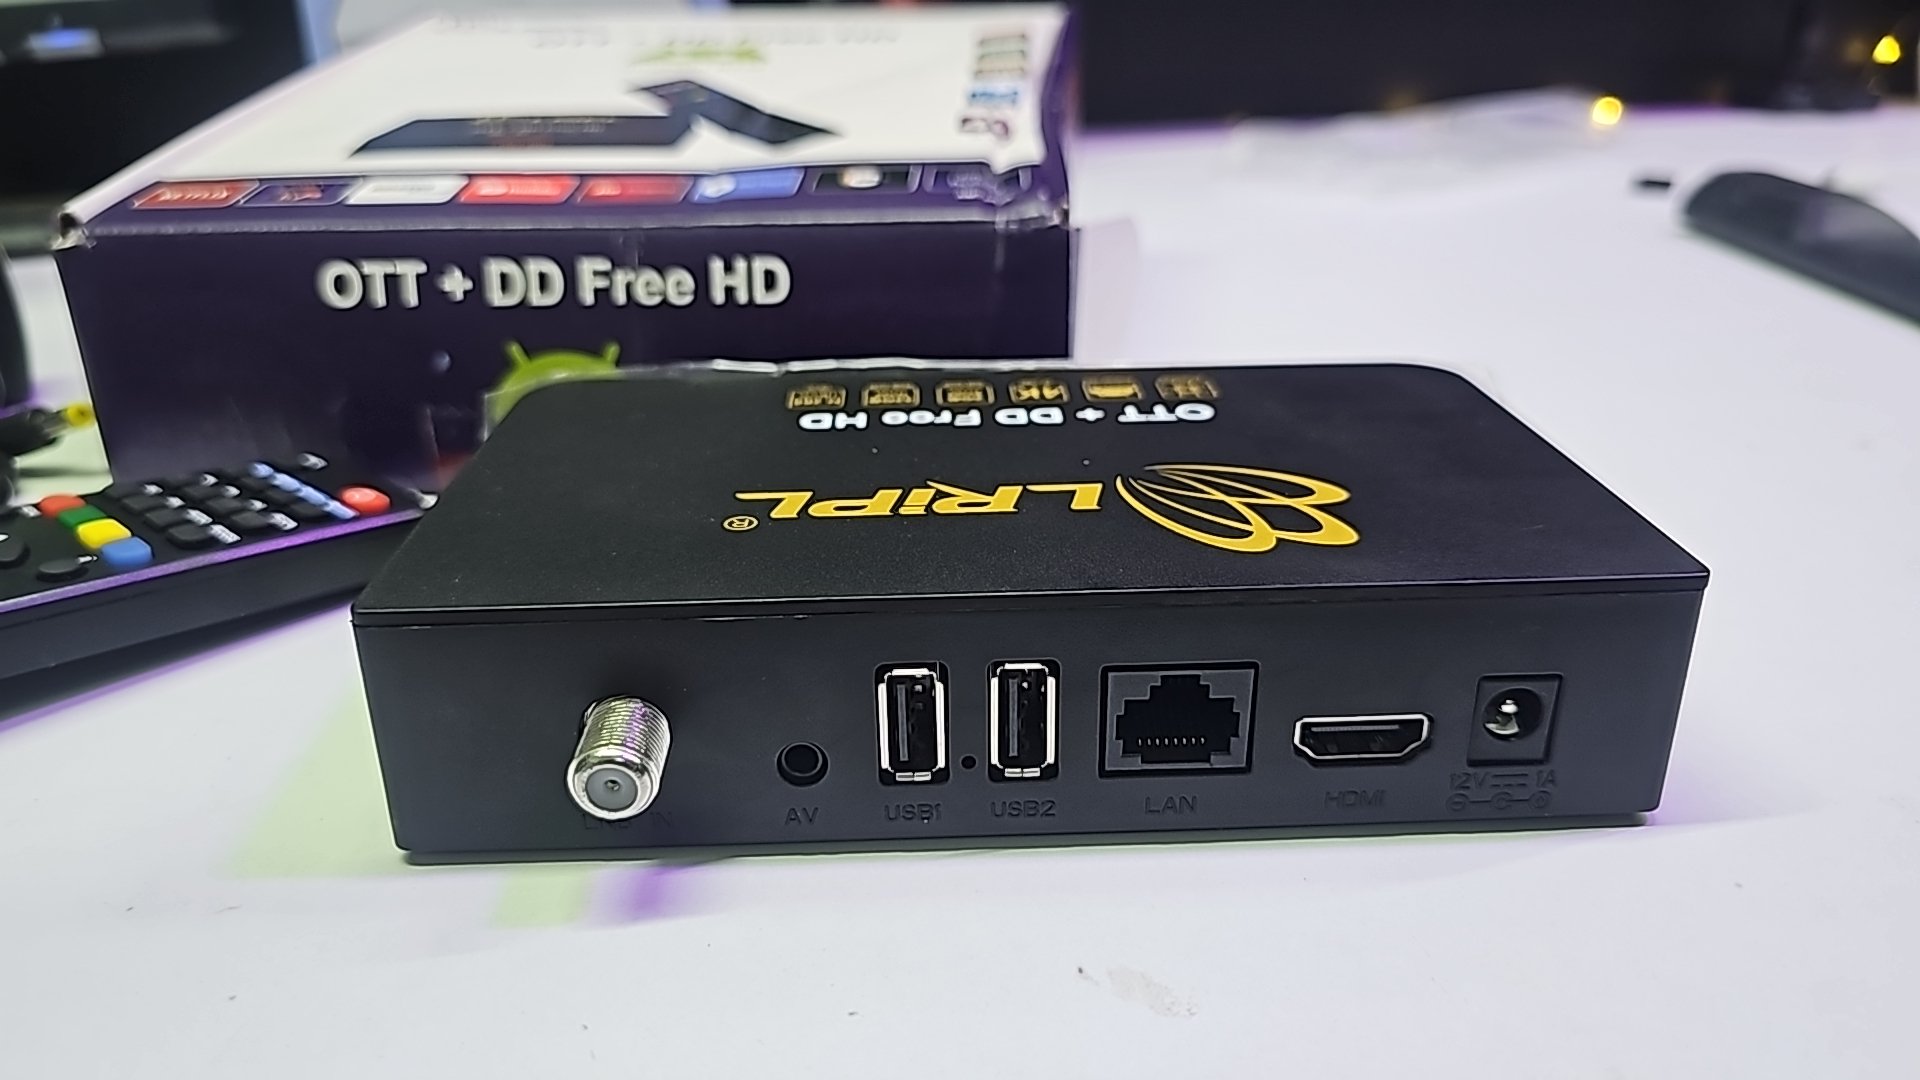 LRIPL Smart TV Box based on Android 10 with 2GB RAM, 16GB ROM, 4K, 1000+ Apps & OTT Support